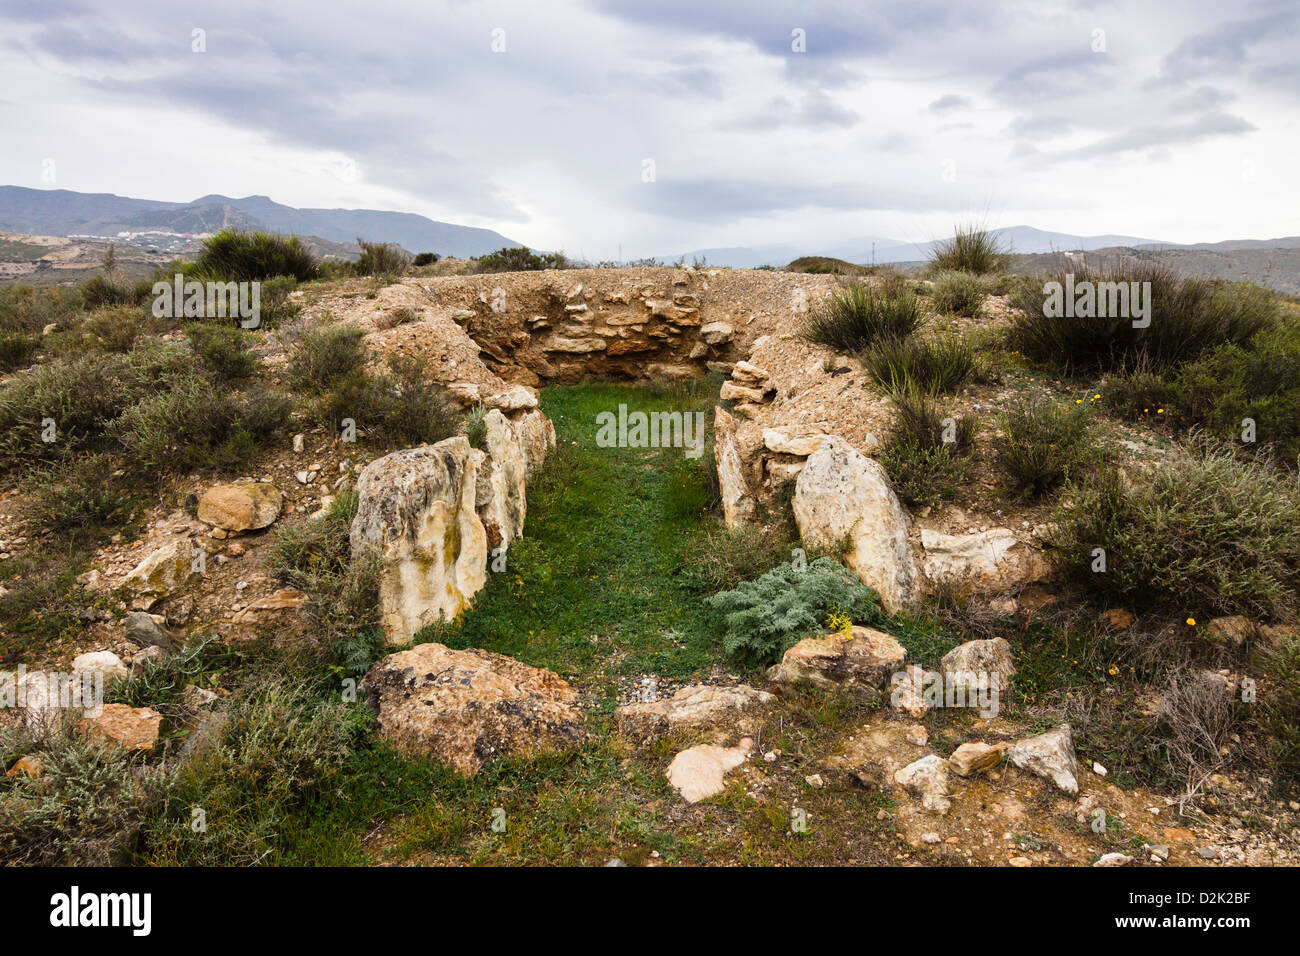 Remains of a tholos passage grave at Los Millares. Copper Age archaeological site. Almeria, Spain Stock Photo